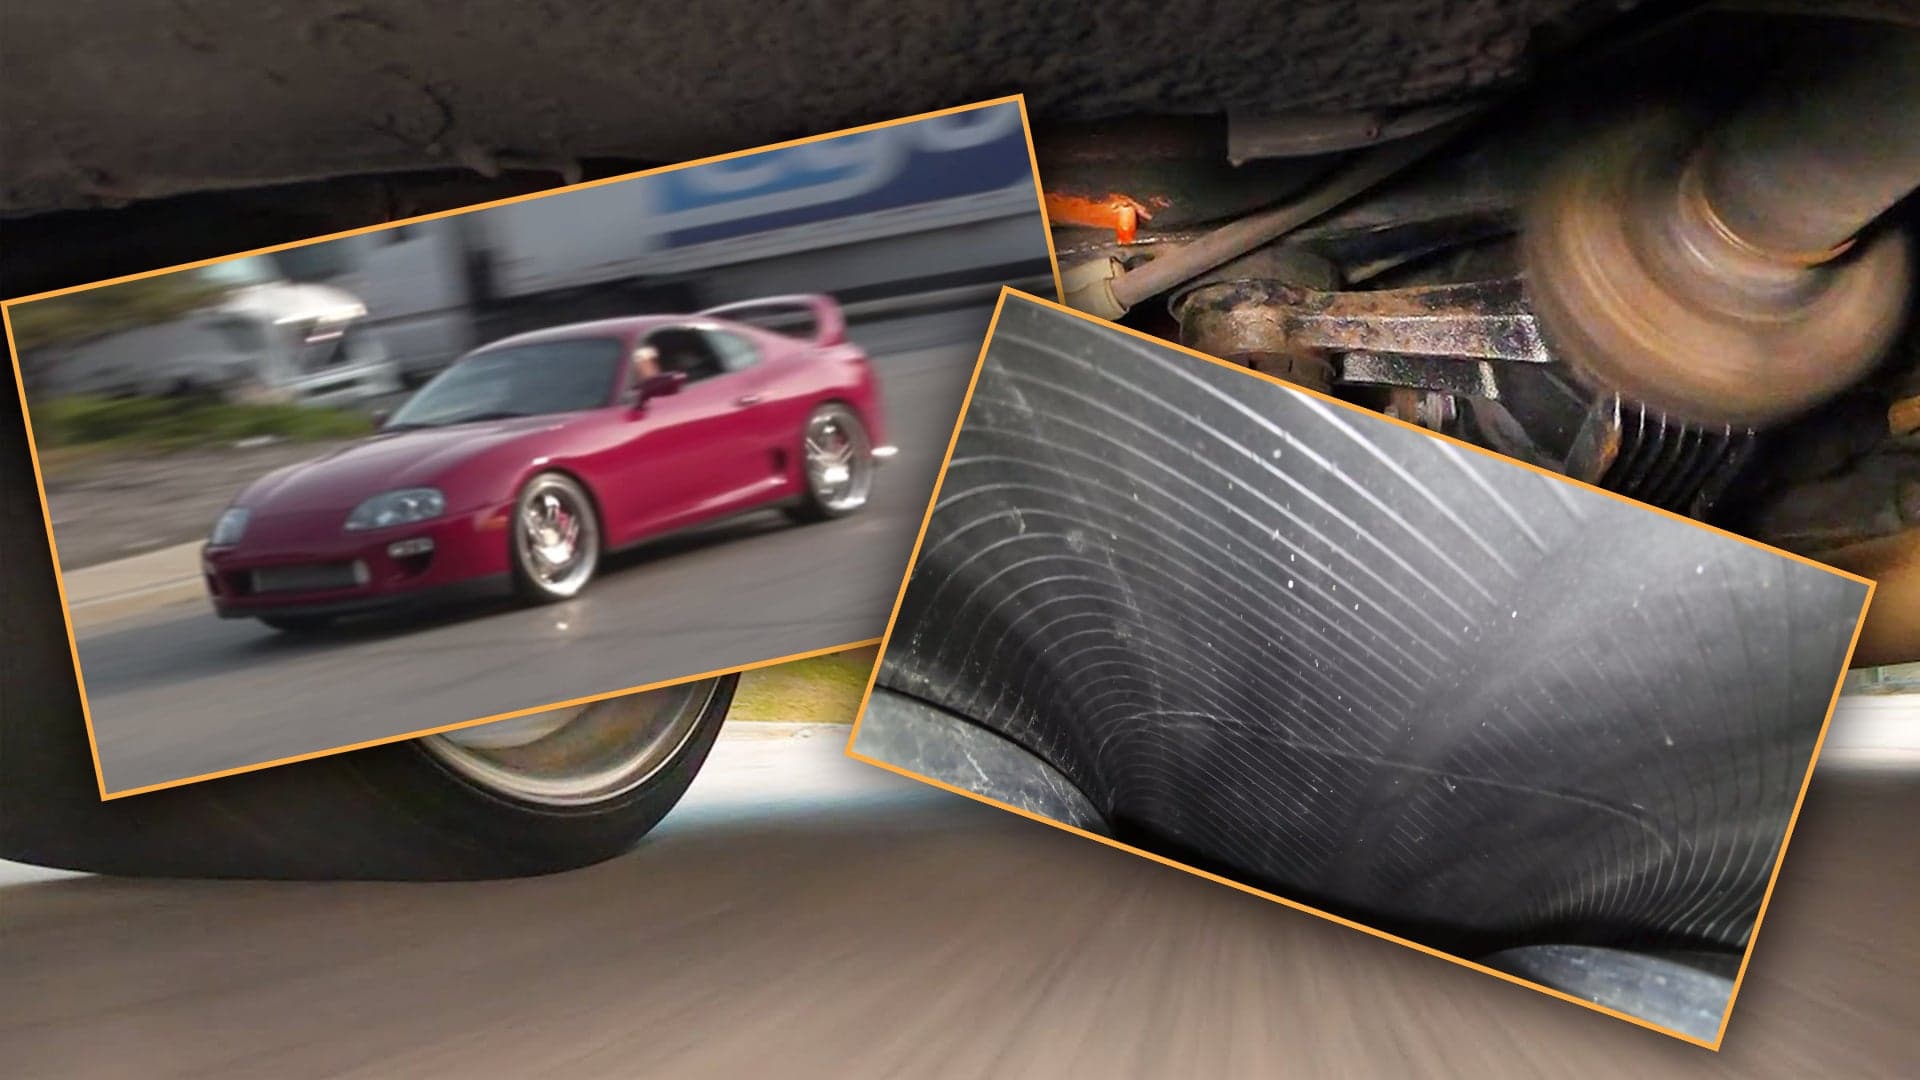 Here’s What a Drifting Toyota Supra Looks Like From Inside the Rear Tire